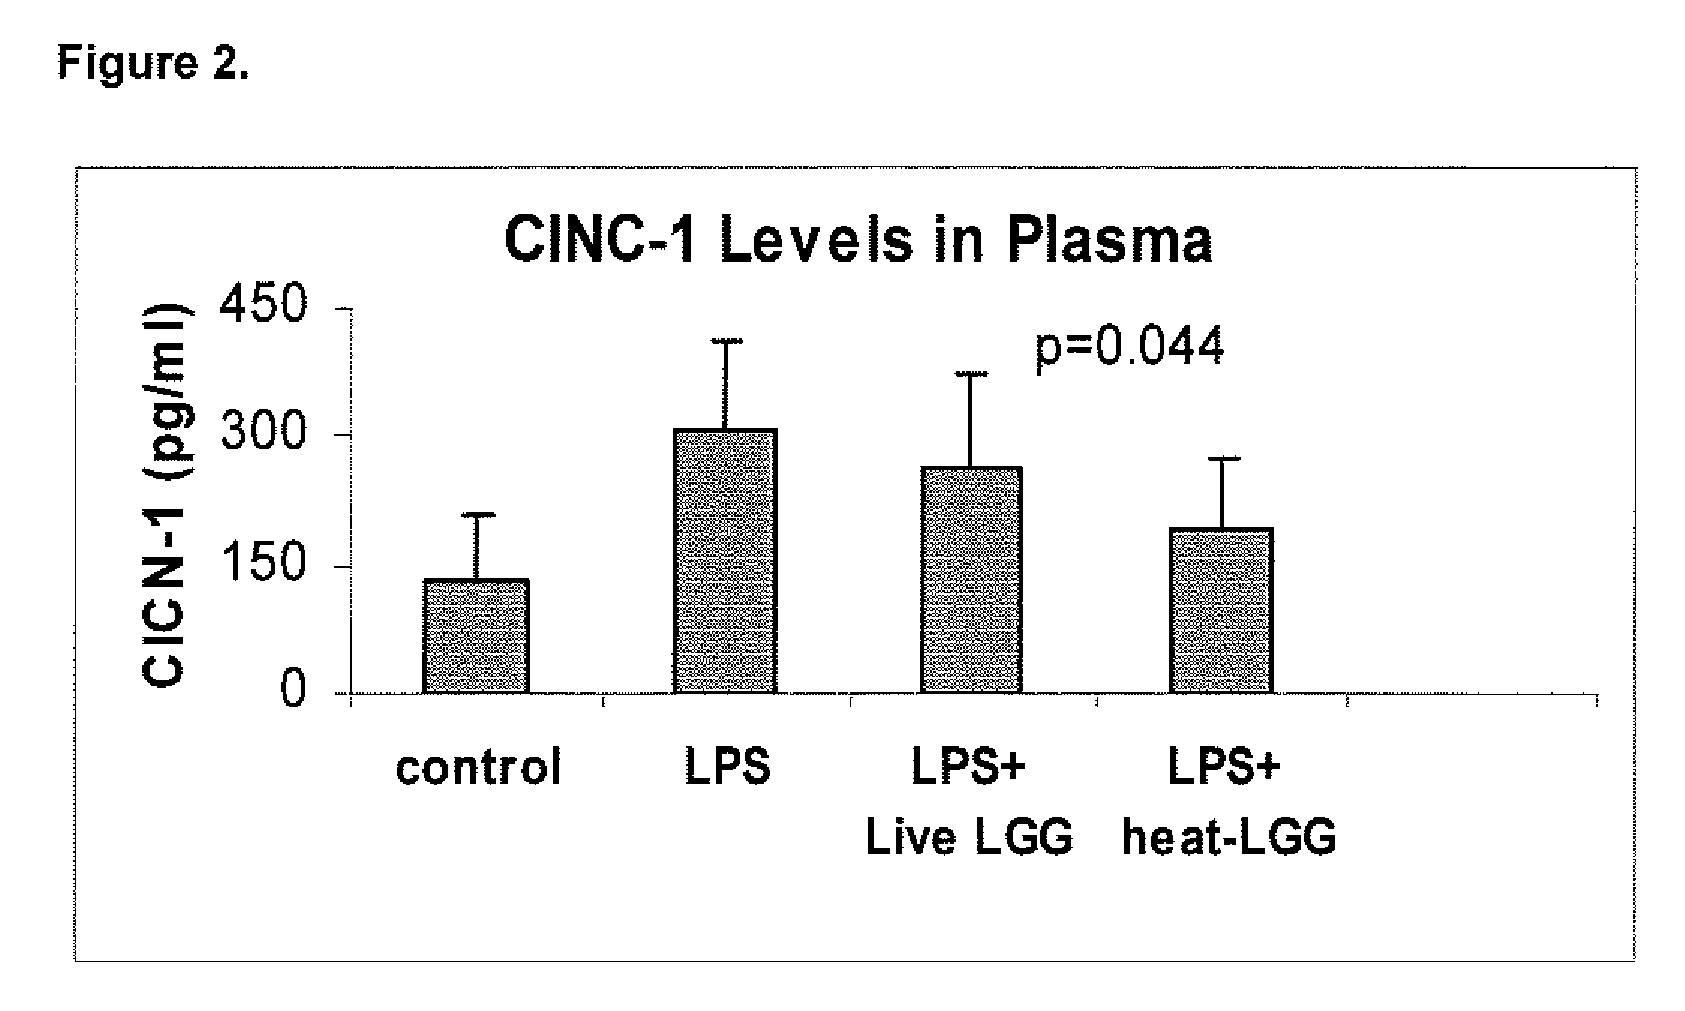 Method for reducing or preventing systemic inflammation